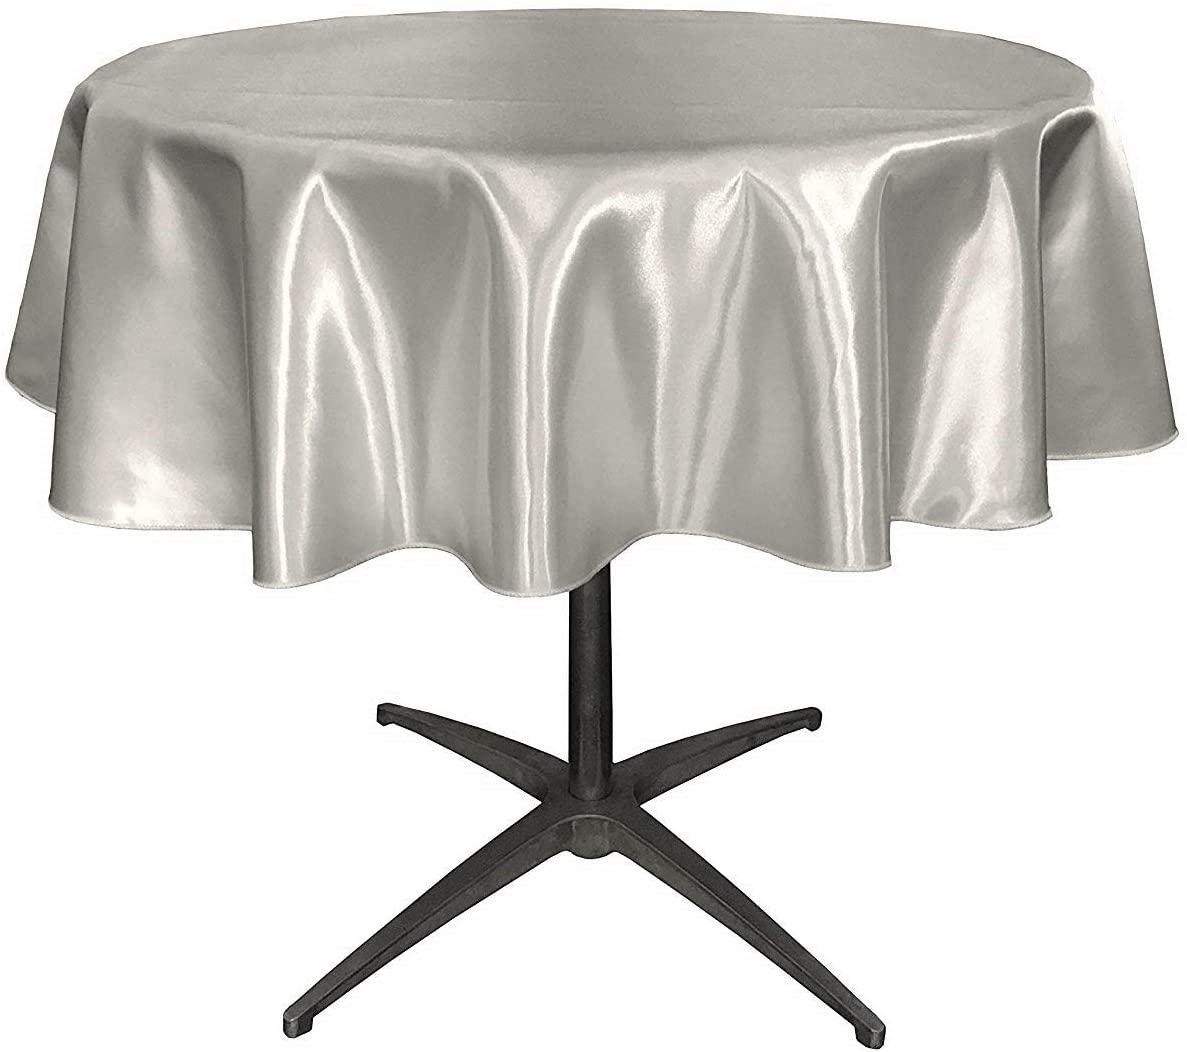 Bridal Satin Table Overlay, for Small Coffee Table (Silver,